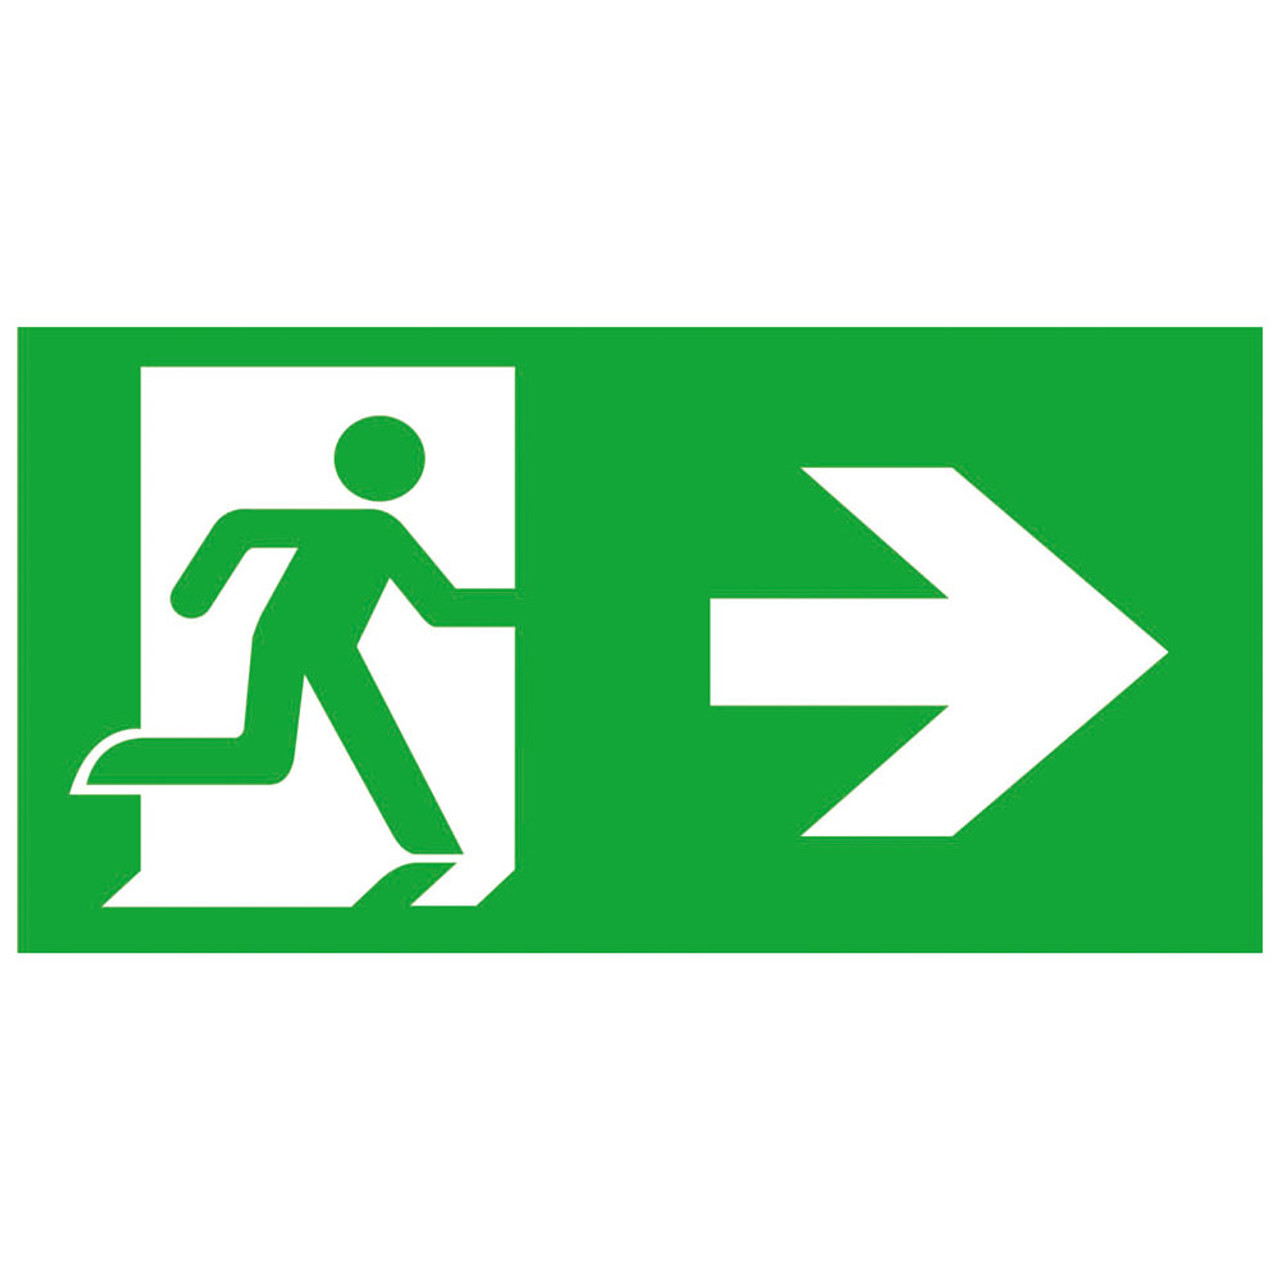 New Legend Right for 9019 Standard Exit Sign